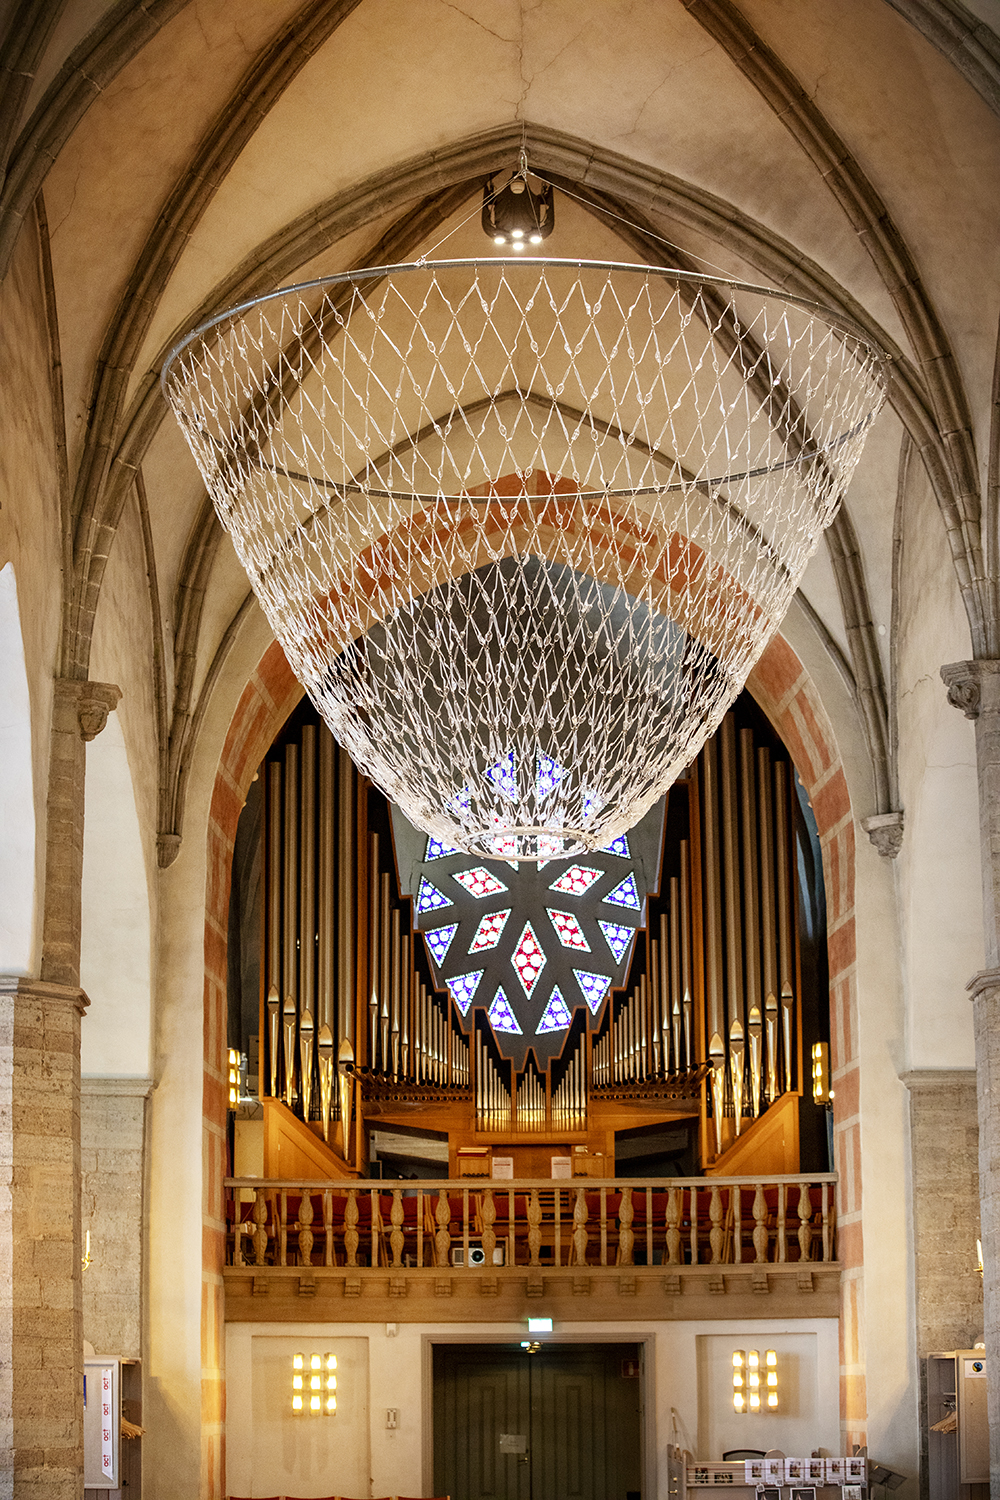 Up in the ceiling inside the Sankt Nicolai church hangs a large chandelier made of transparent cutlery. The crown is shaped like an upside-down round cone and the cutlery is assembled with small threads and rings so that they create a quadrilateral triangle pattern. In the background, an organ can be seen in front of an incredibly colorful window.